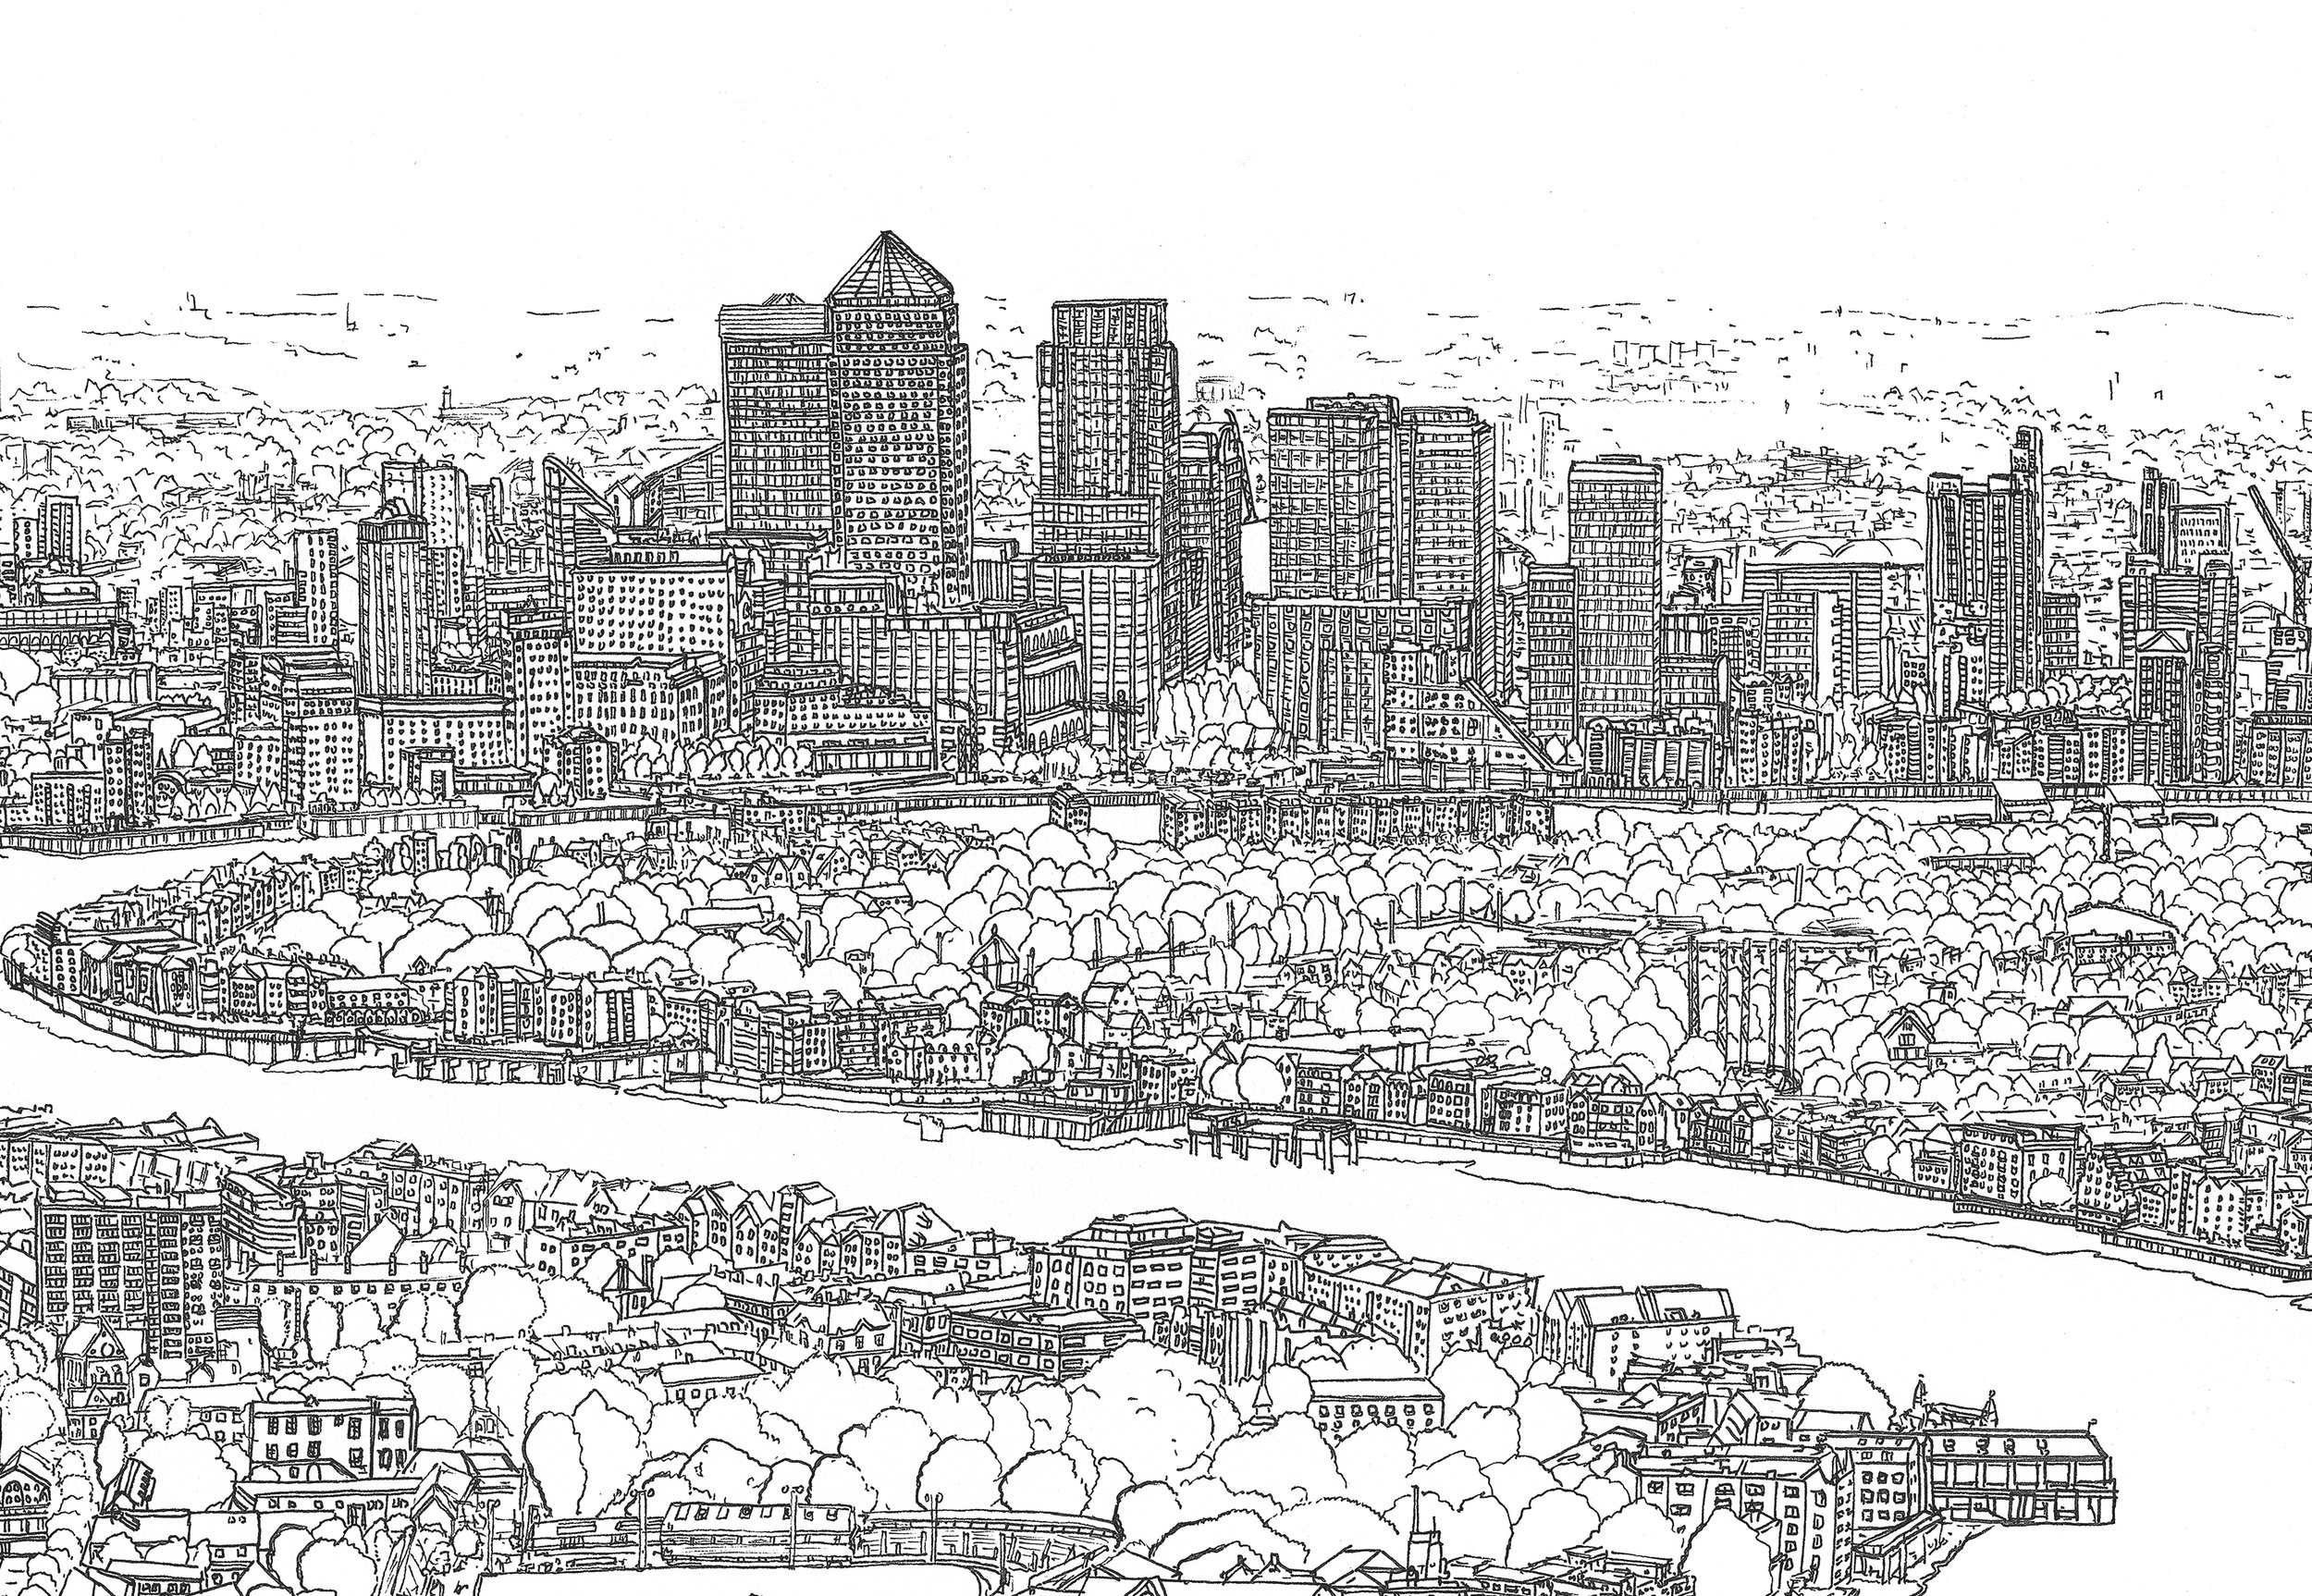 London Panorama Drawing - the view from the Shard on Behance